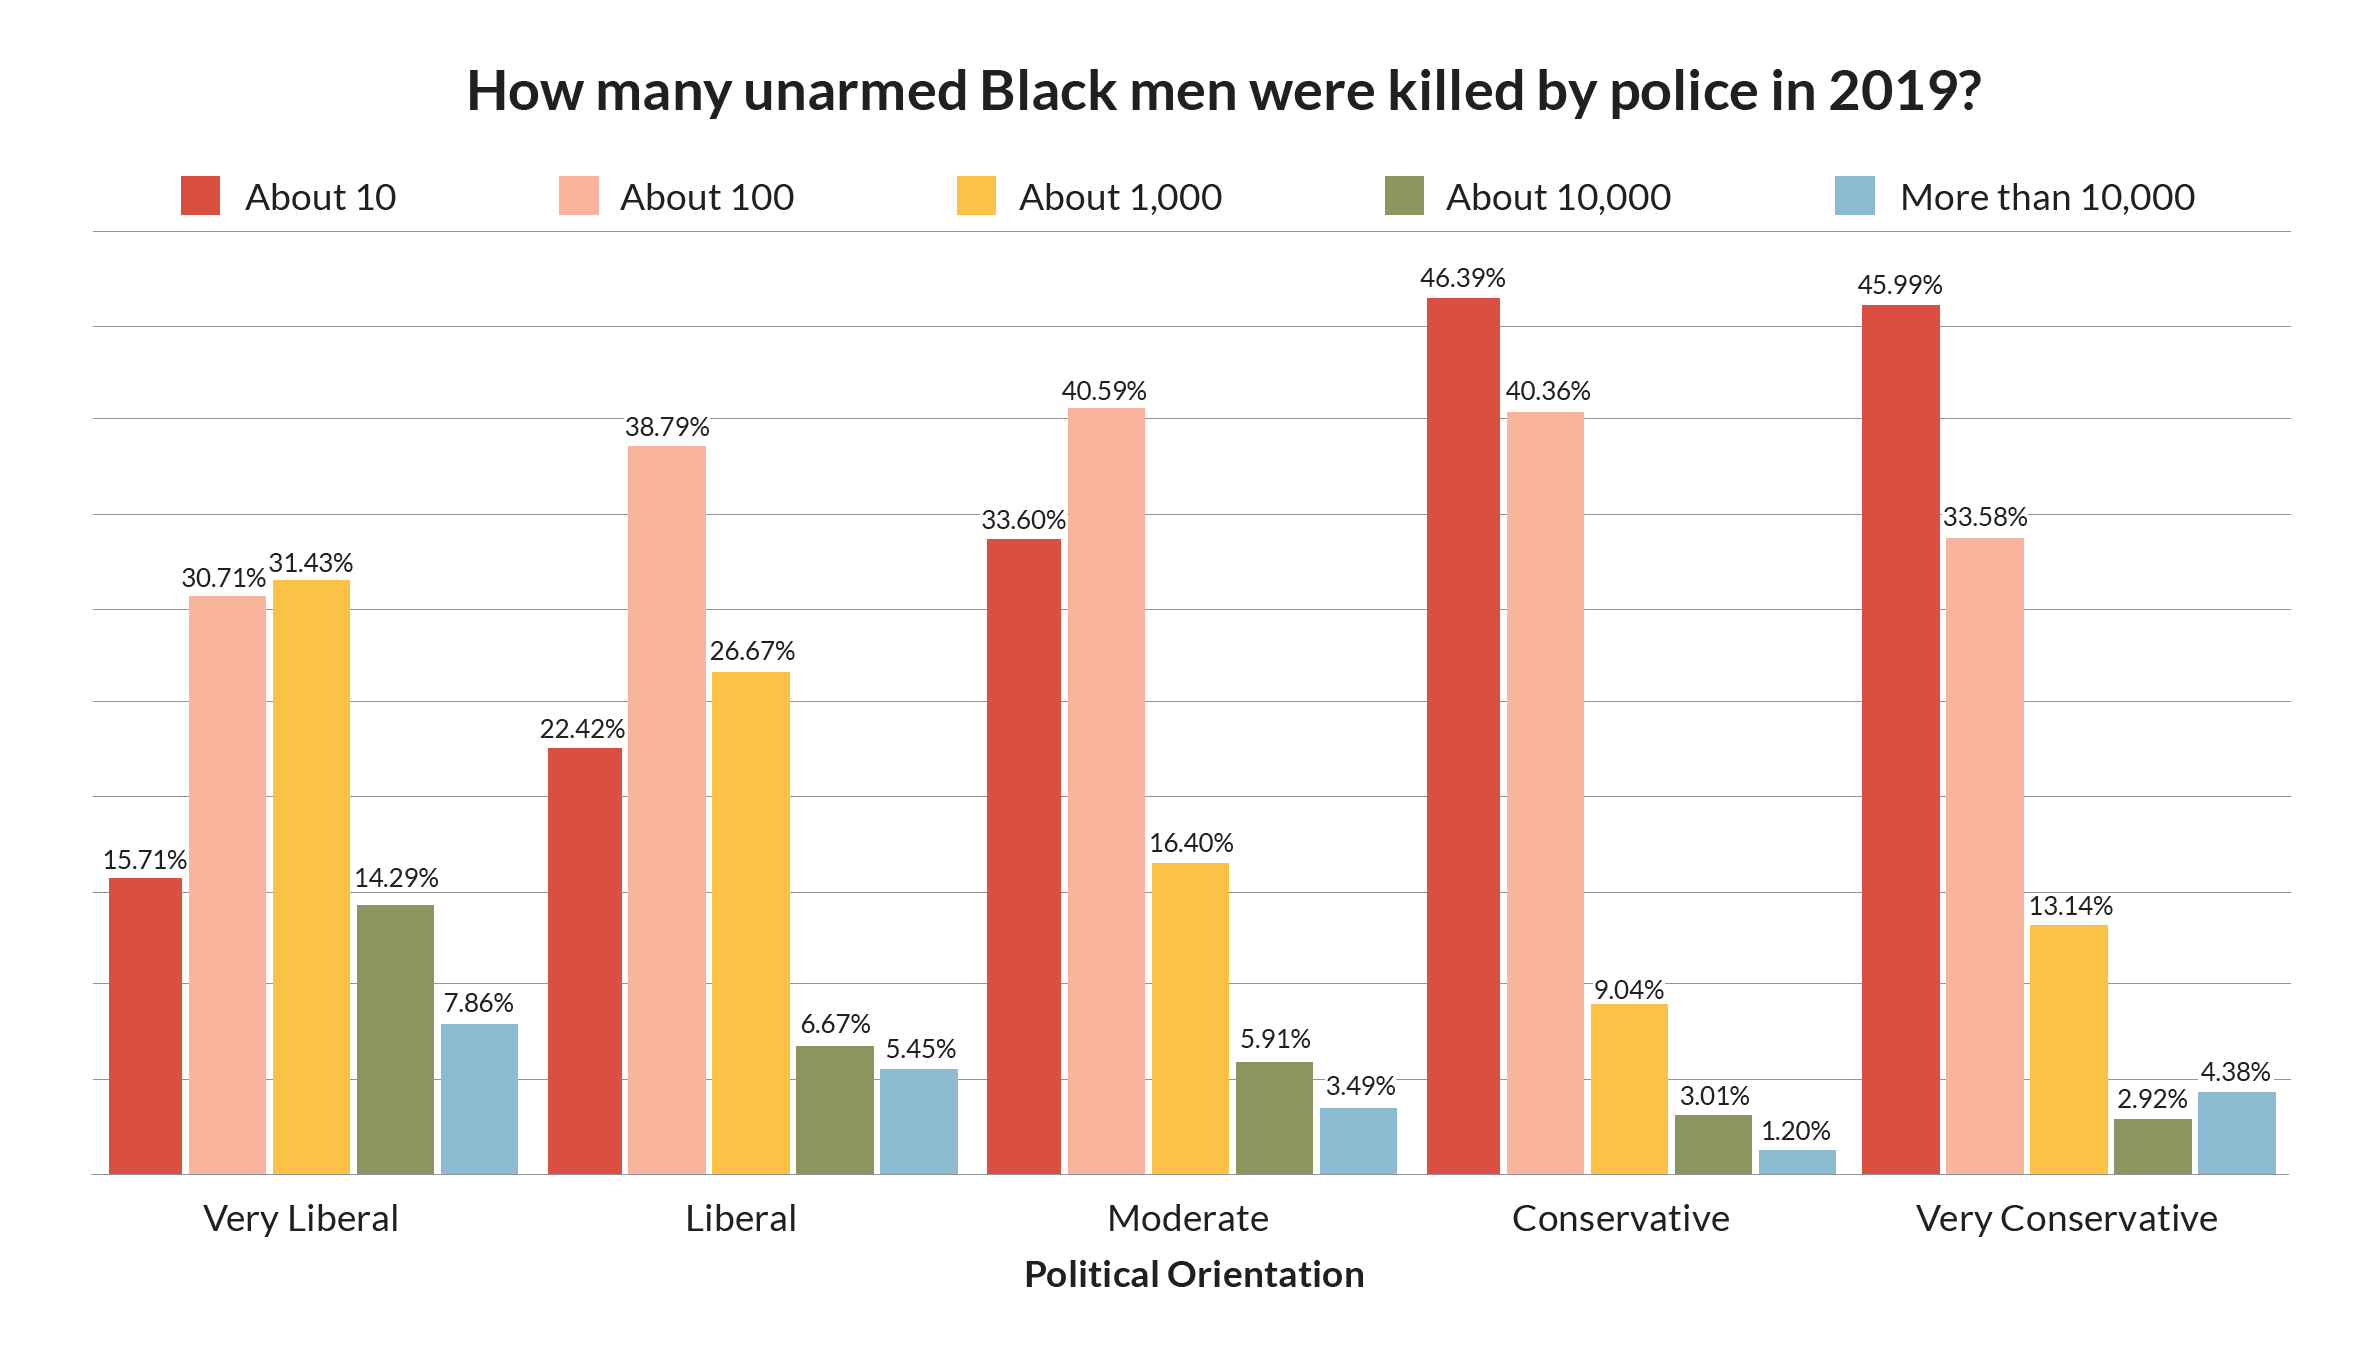 How many unarmed Black men were killed by police in 2019?